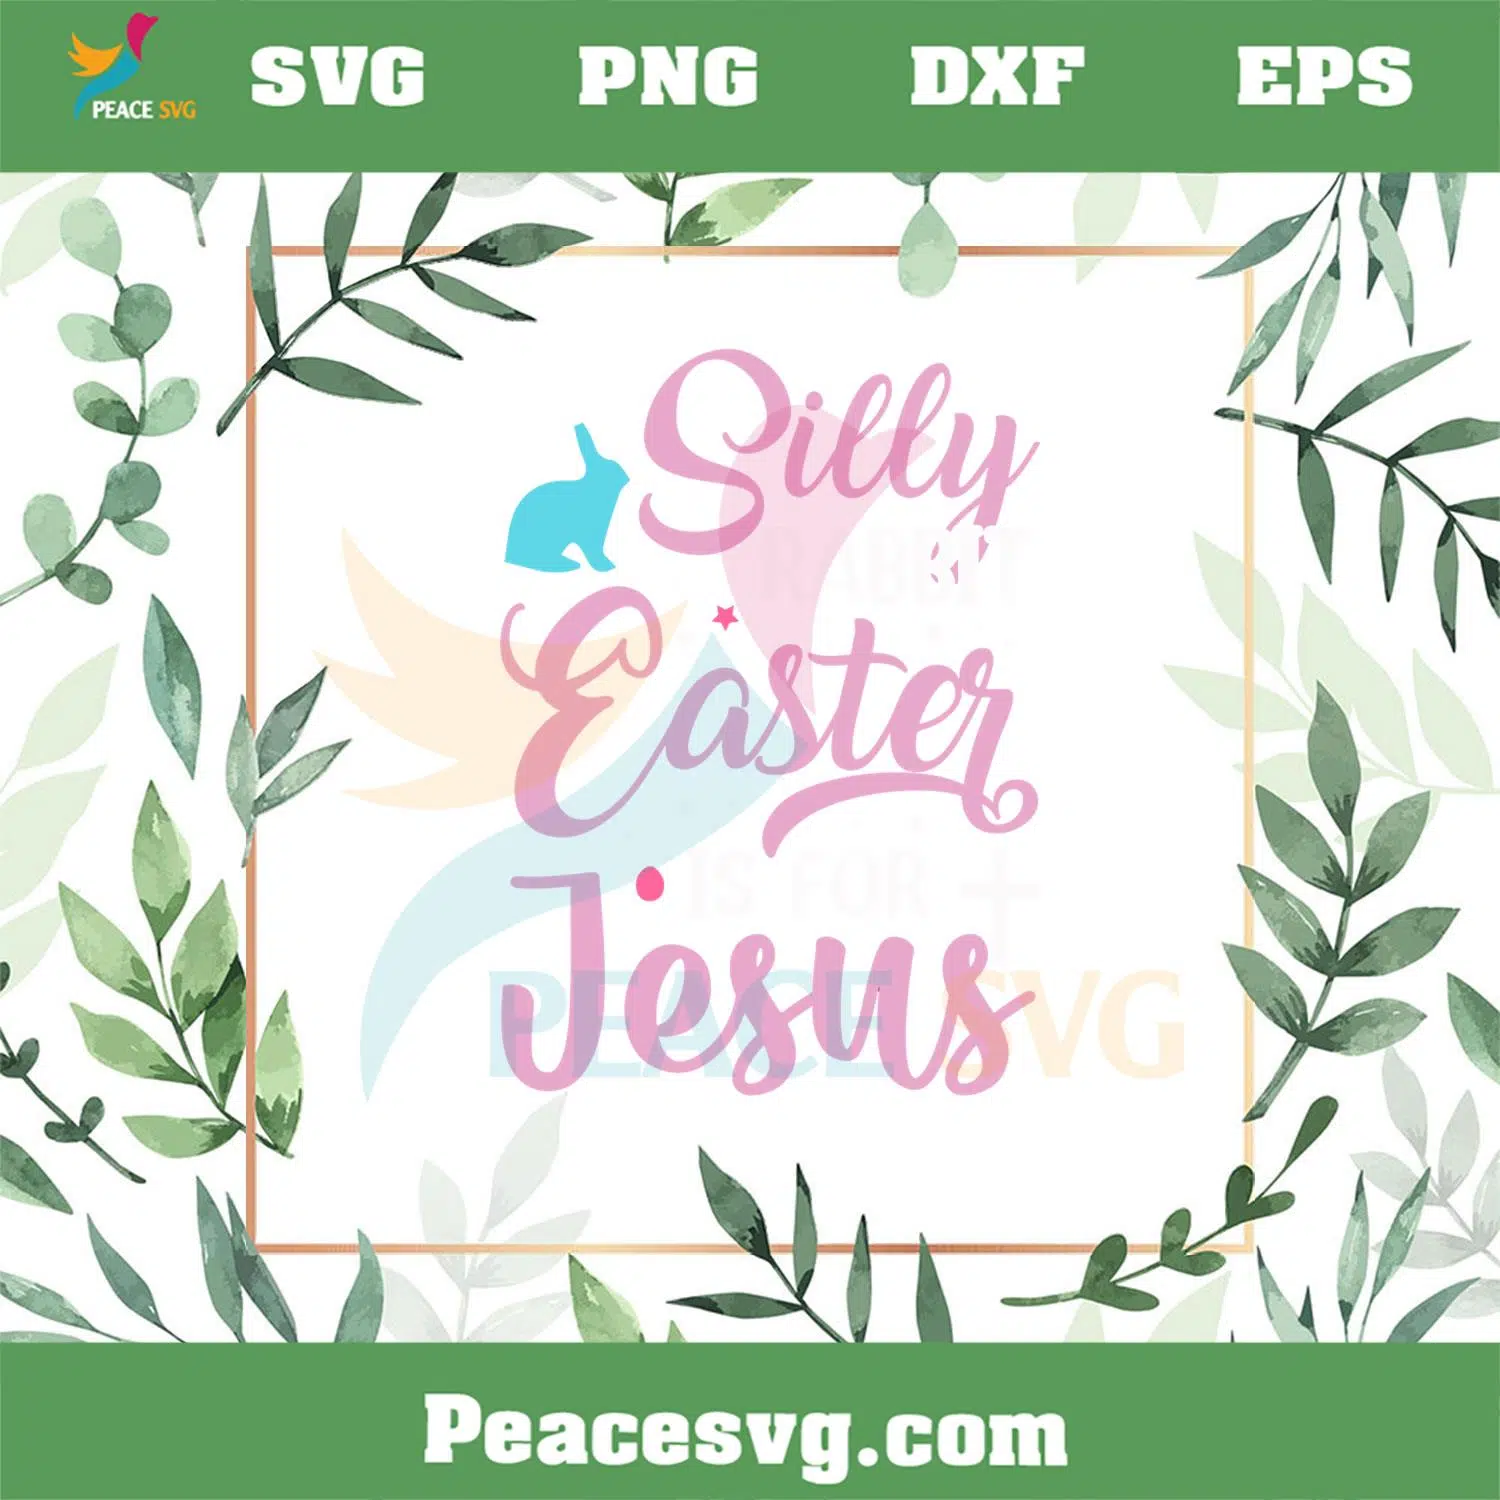 Silly Rabbit Easter Is For Jesus Christian Holiday SVG Cutting Files